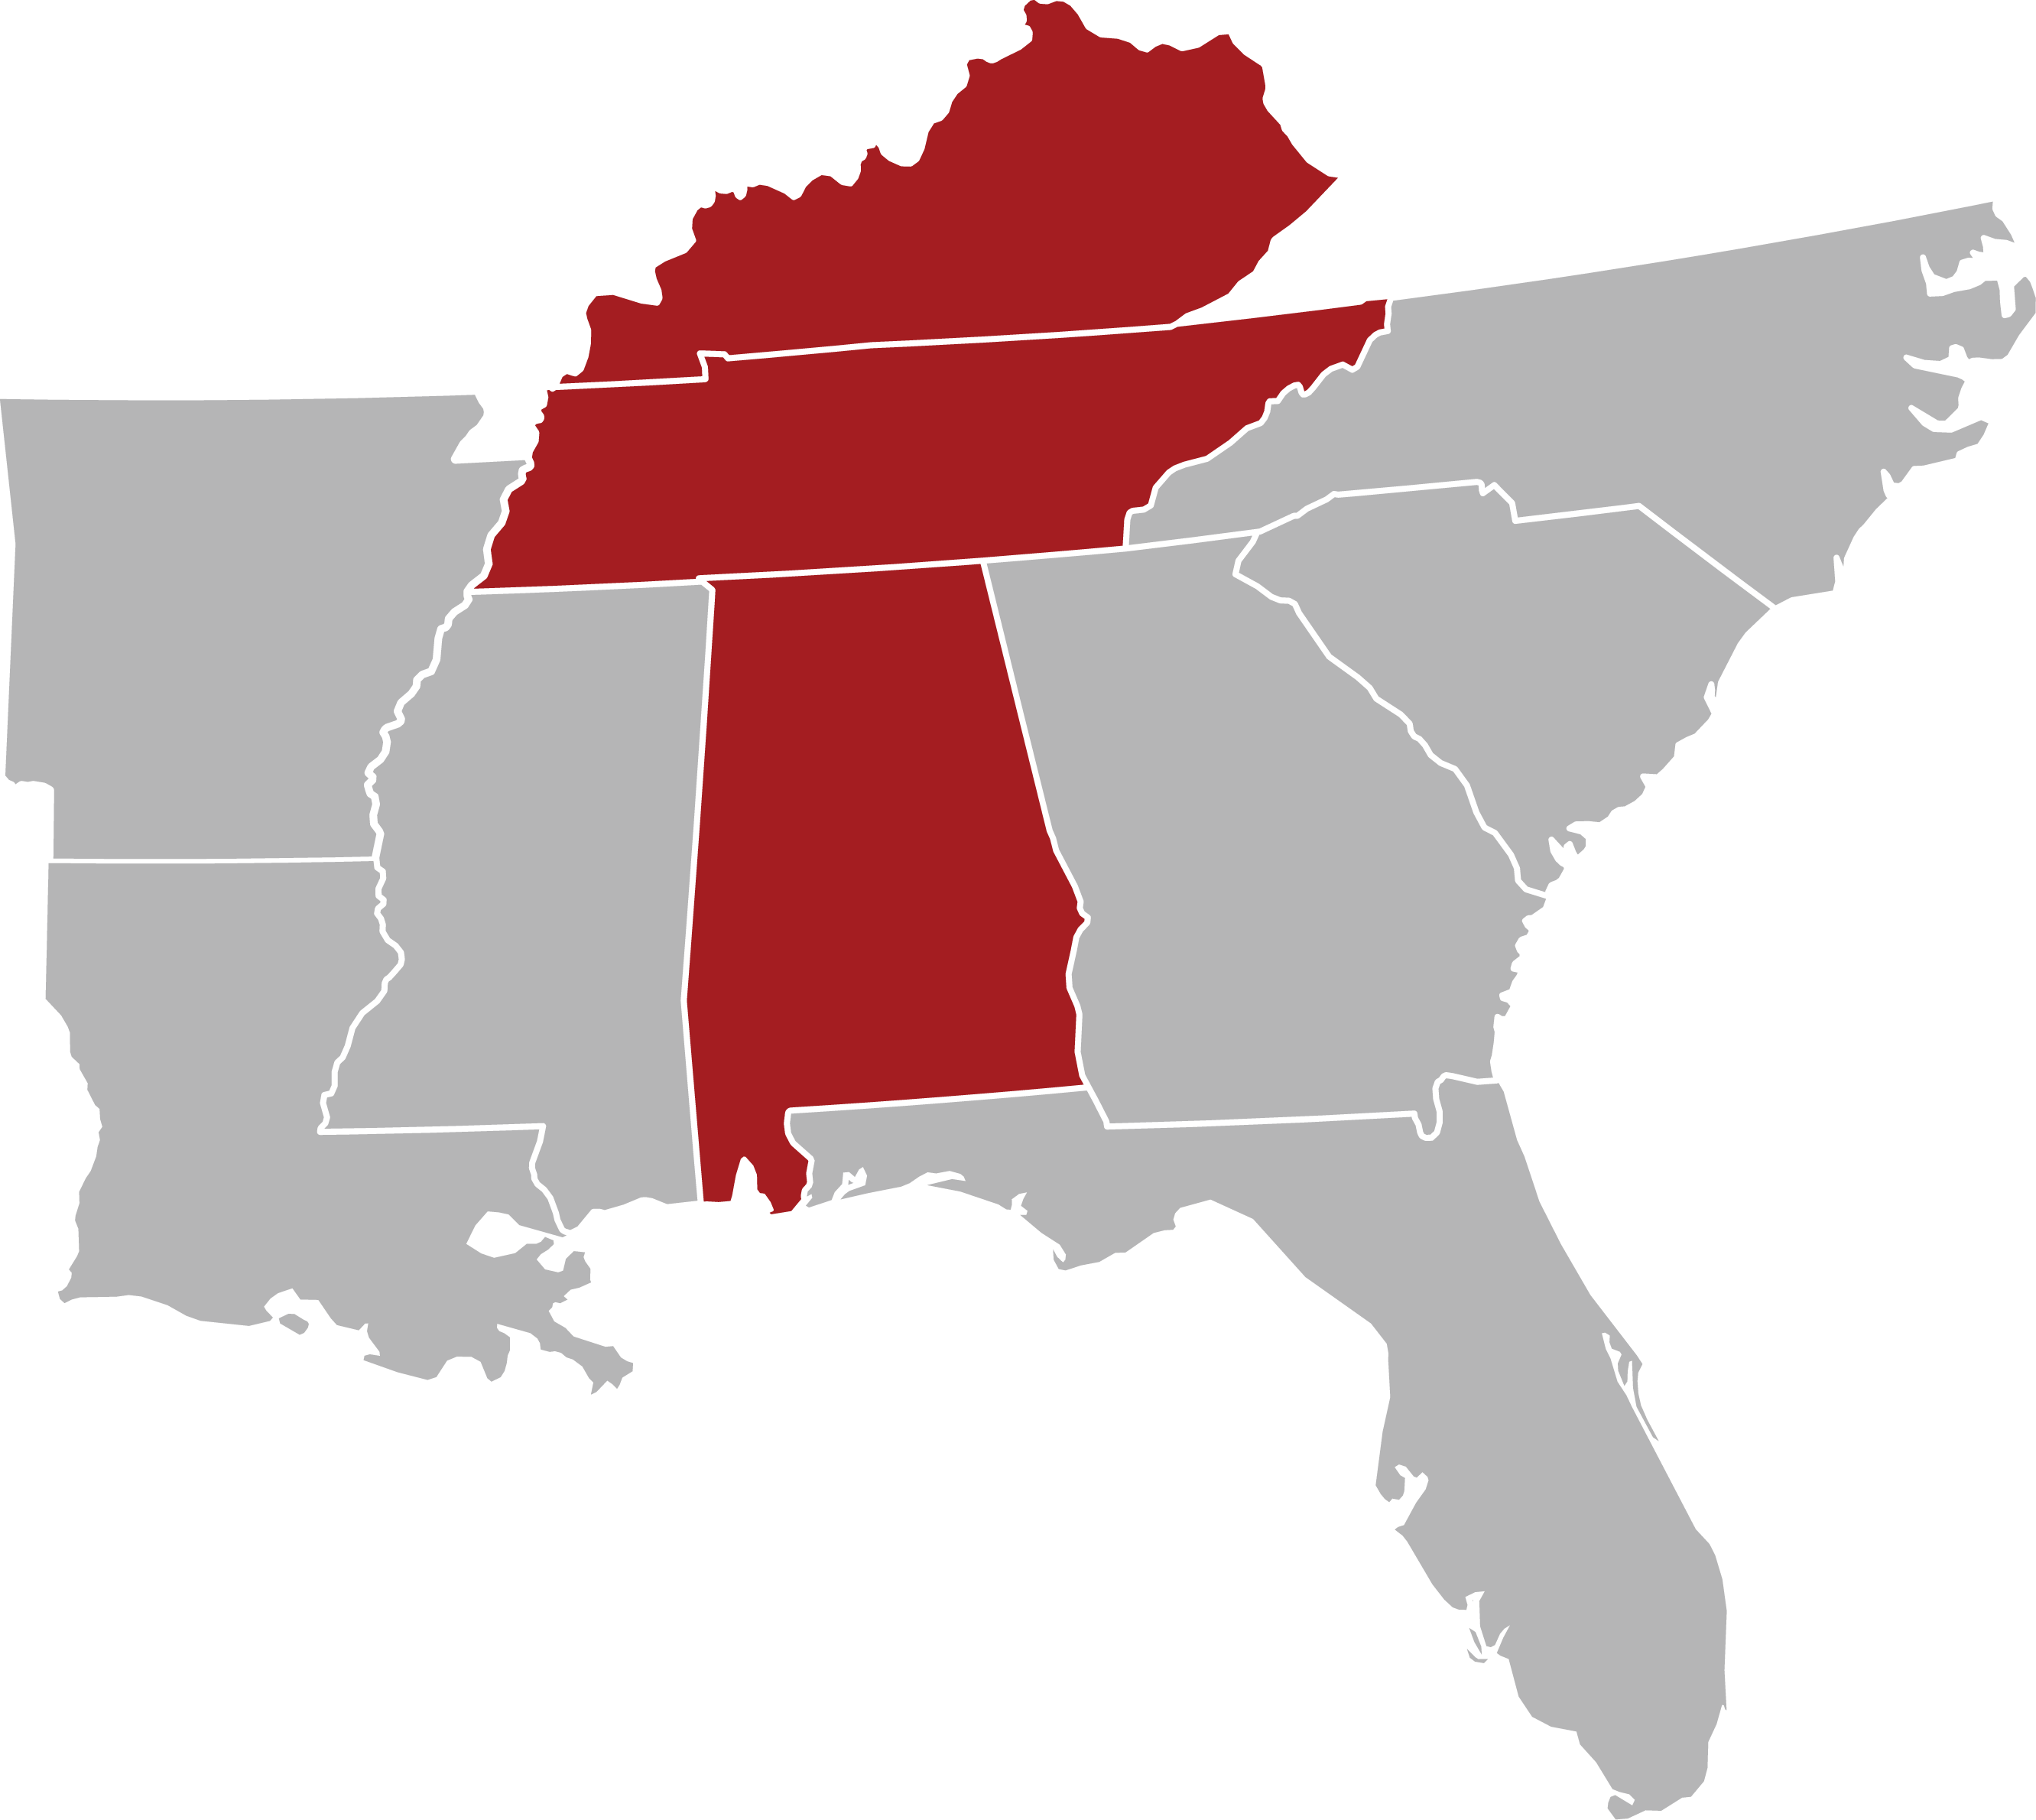 Map of the southeastern United States with Kentucky, Tennessee & Alabama highlighted in red.